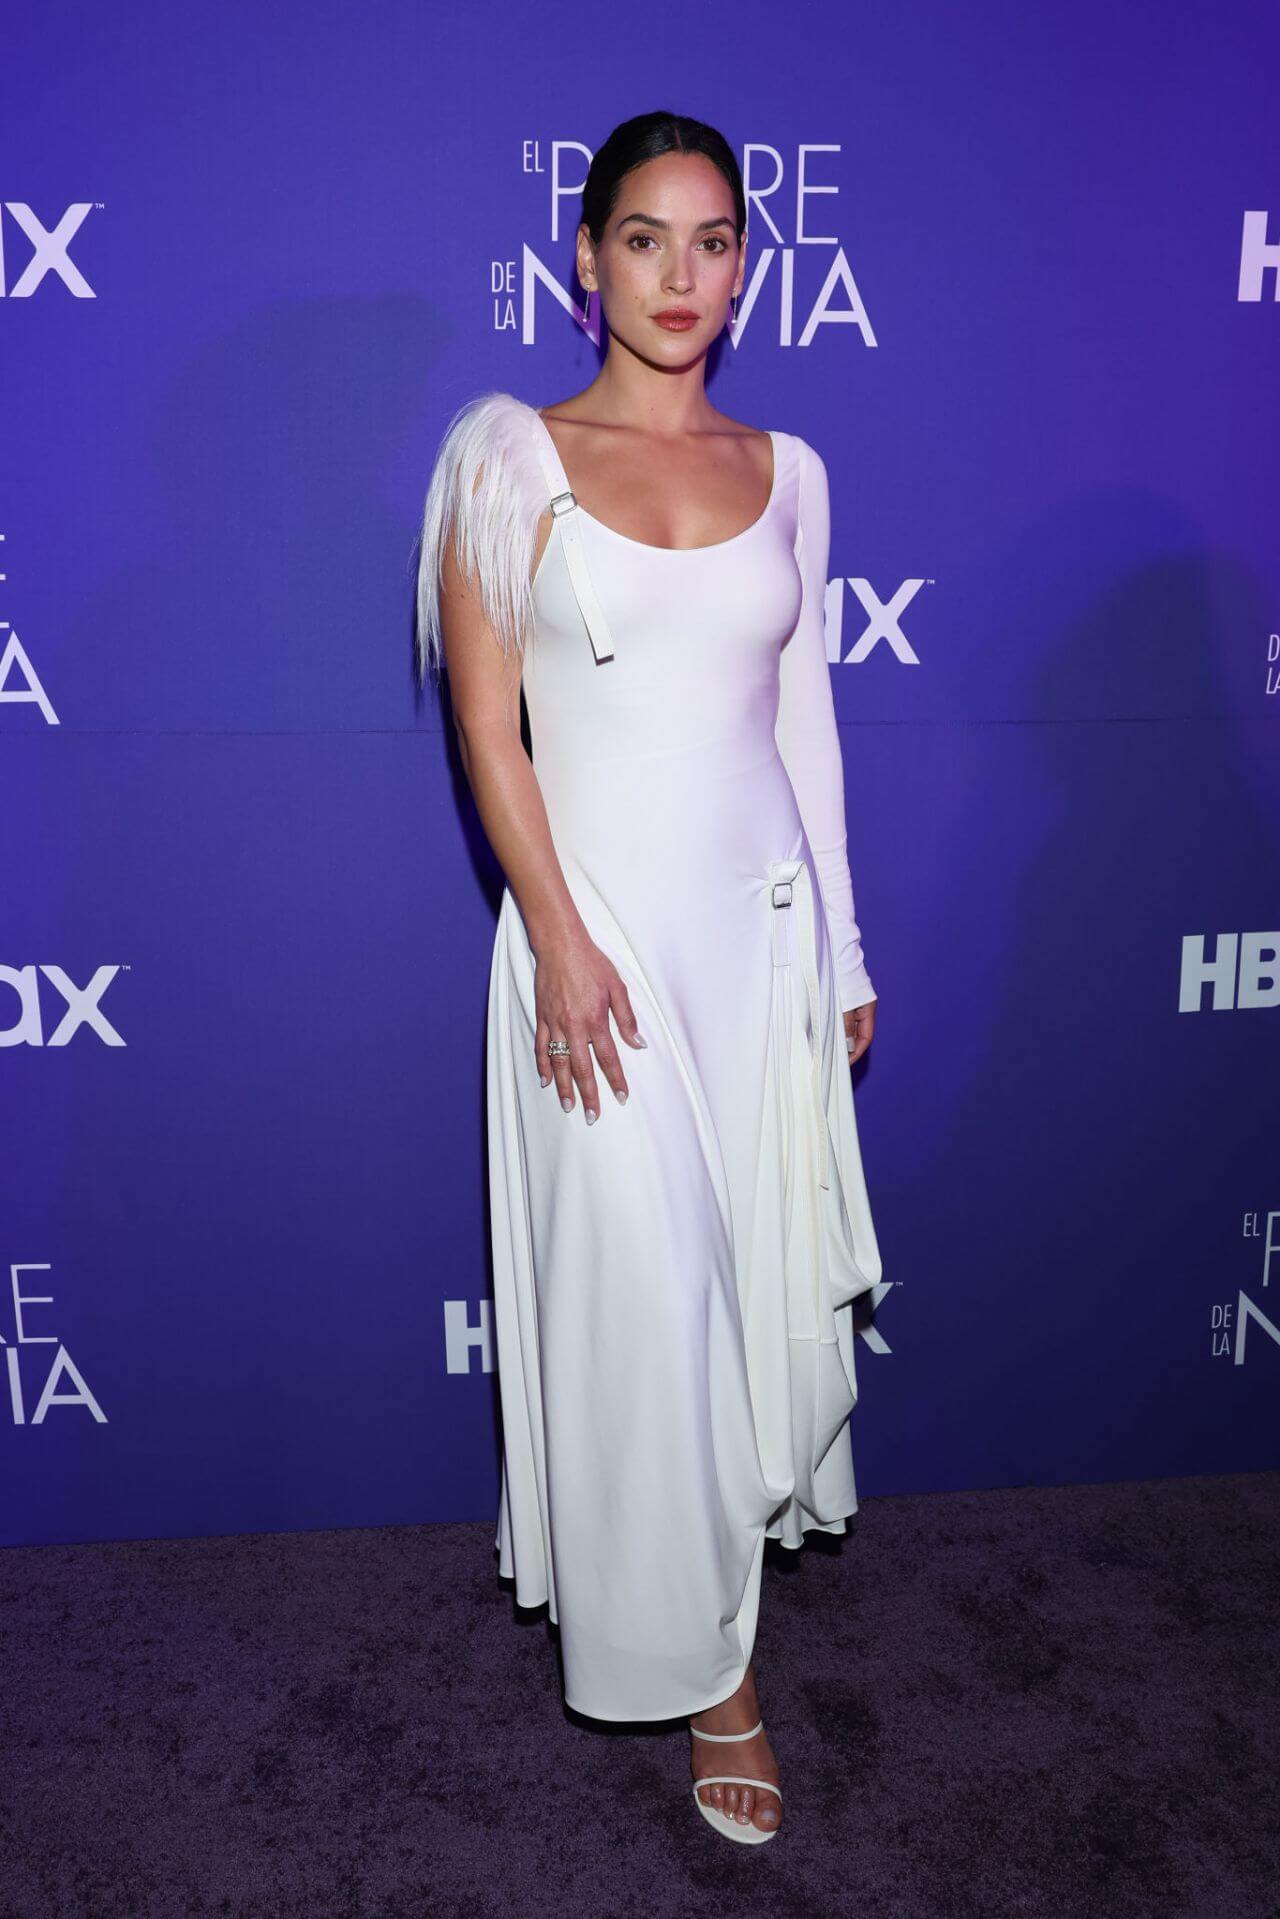 Adria Arjona In White Dress With One Side Full Sleeves & Another Side Angel Wings